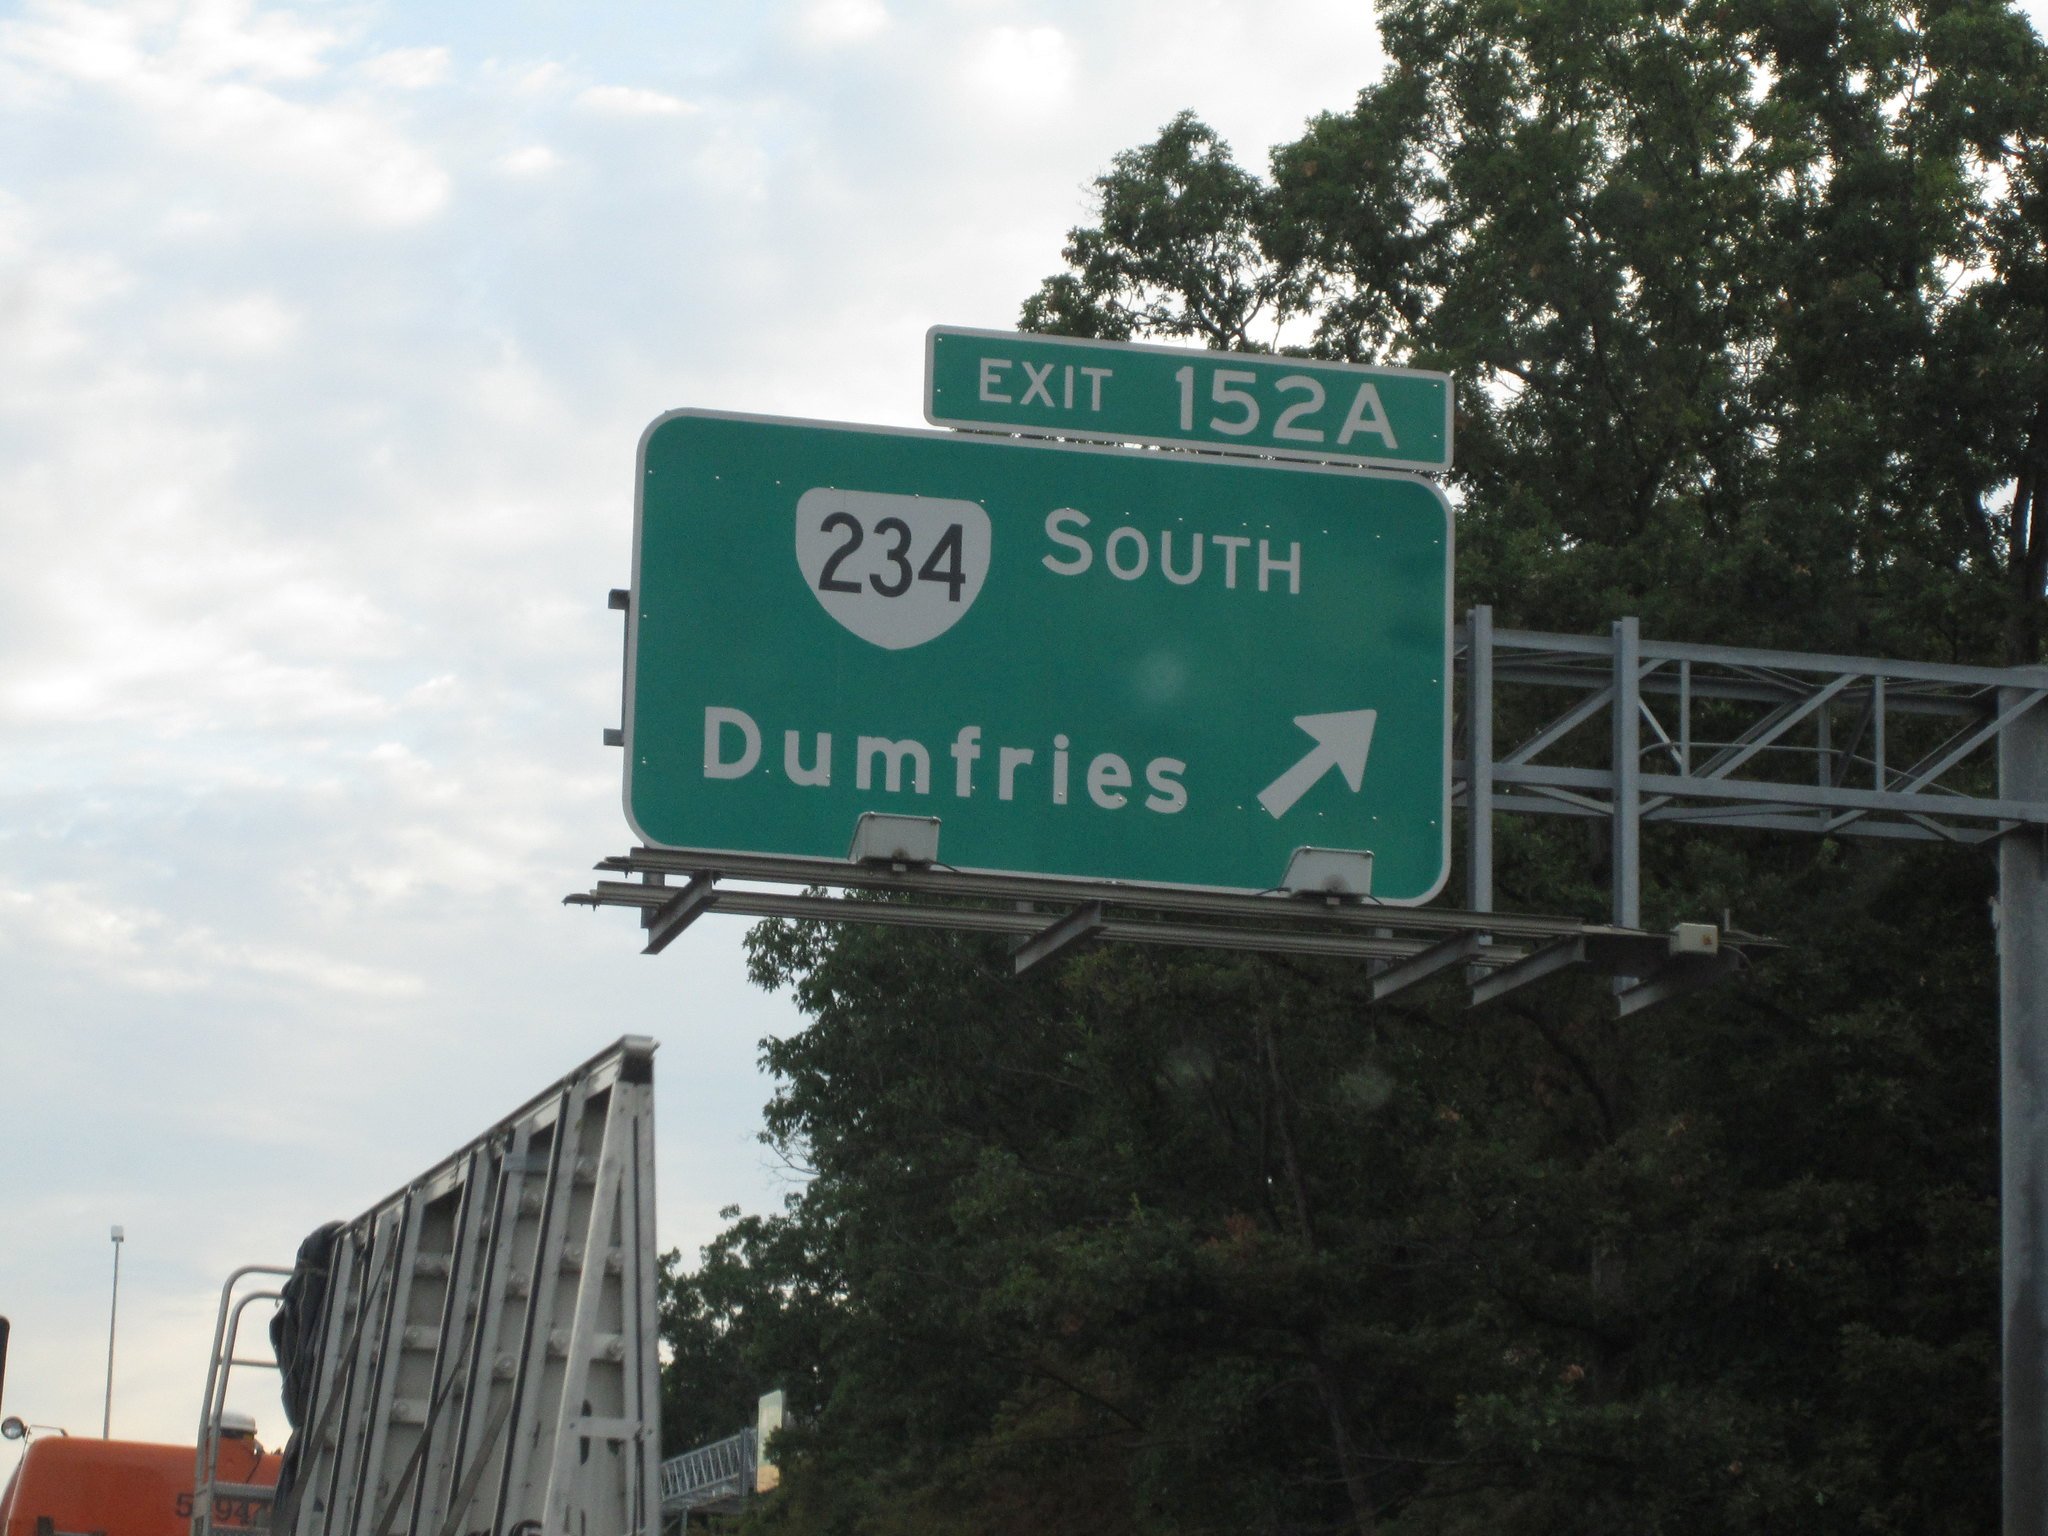  5 Facts About Dumfries, Virginia, the Possible New Home of the Washington Commanders 